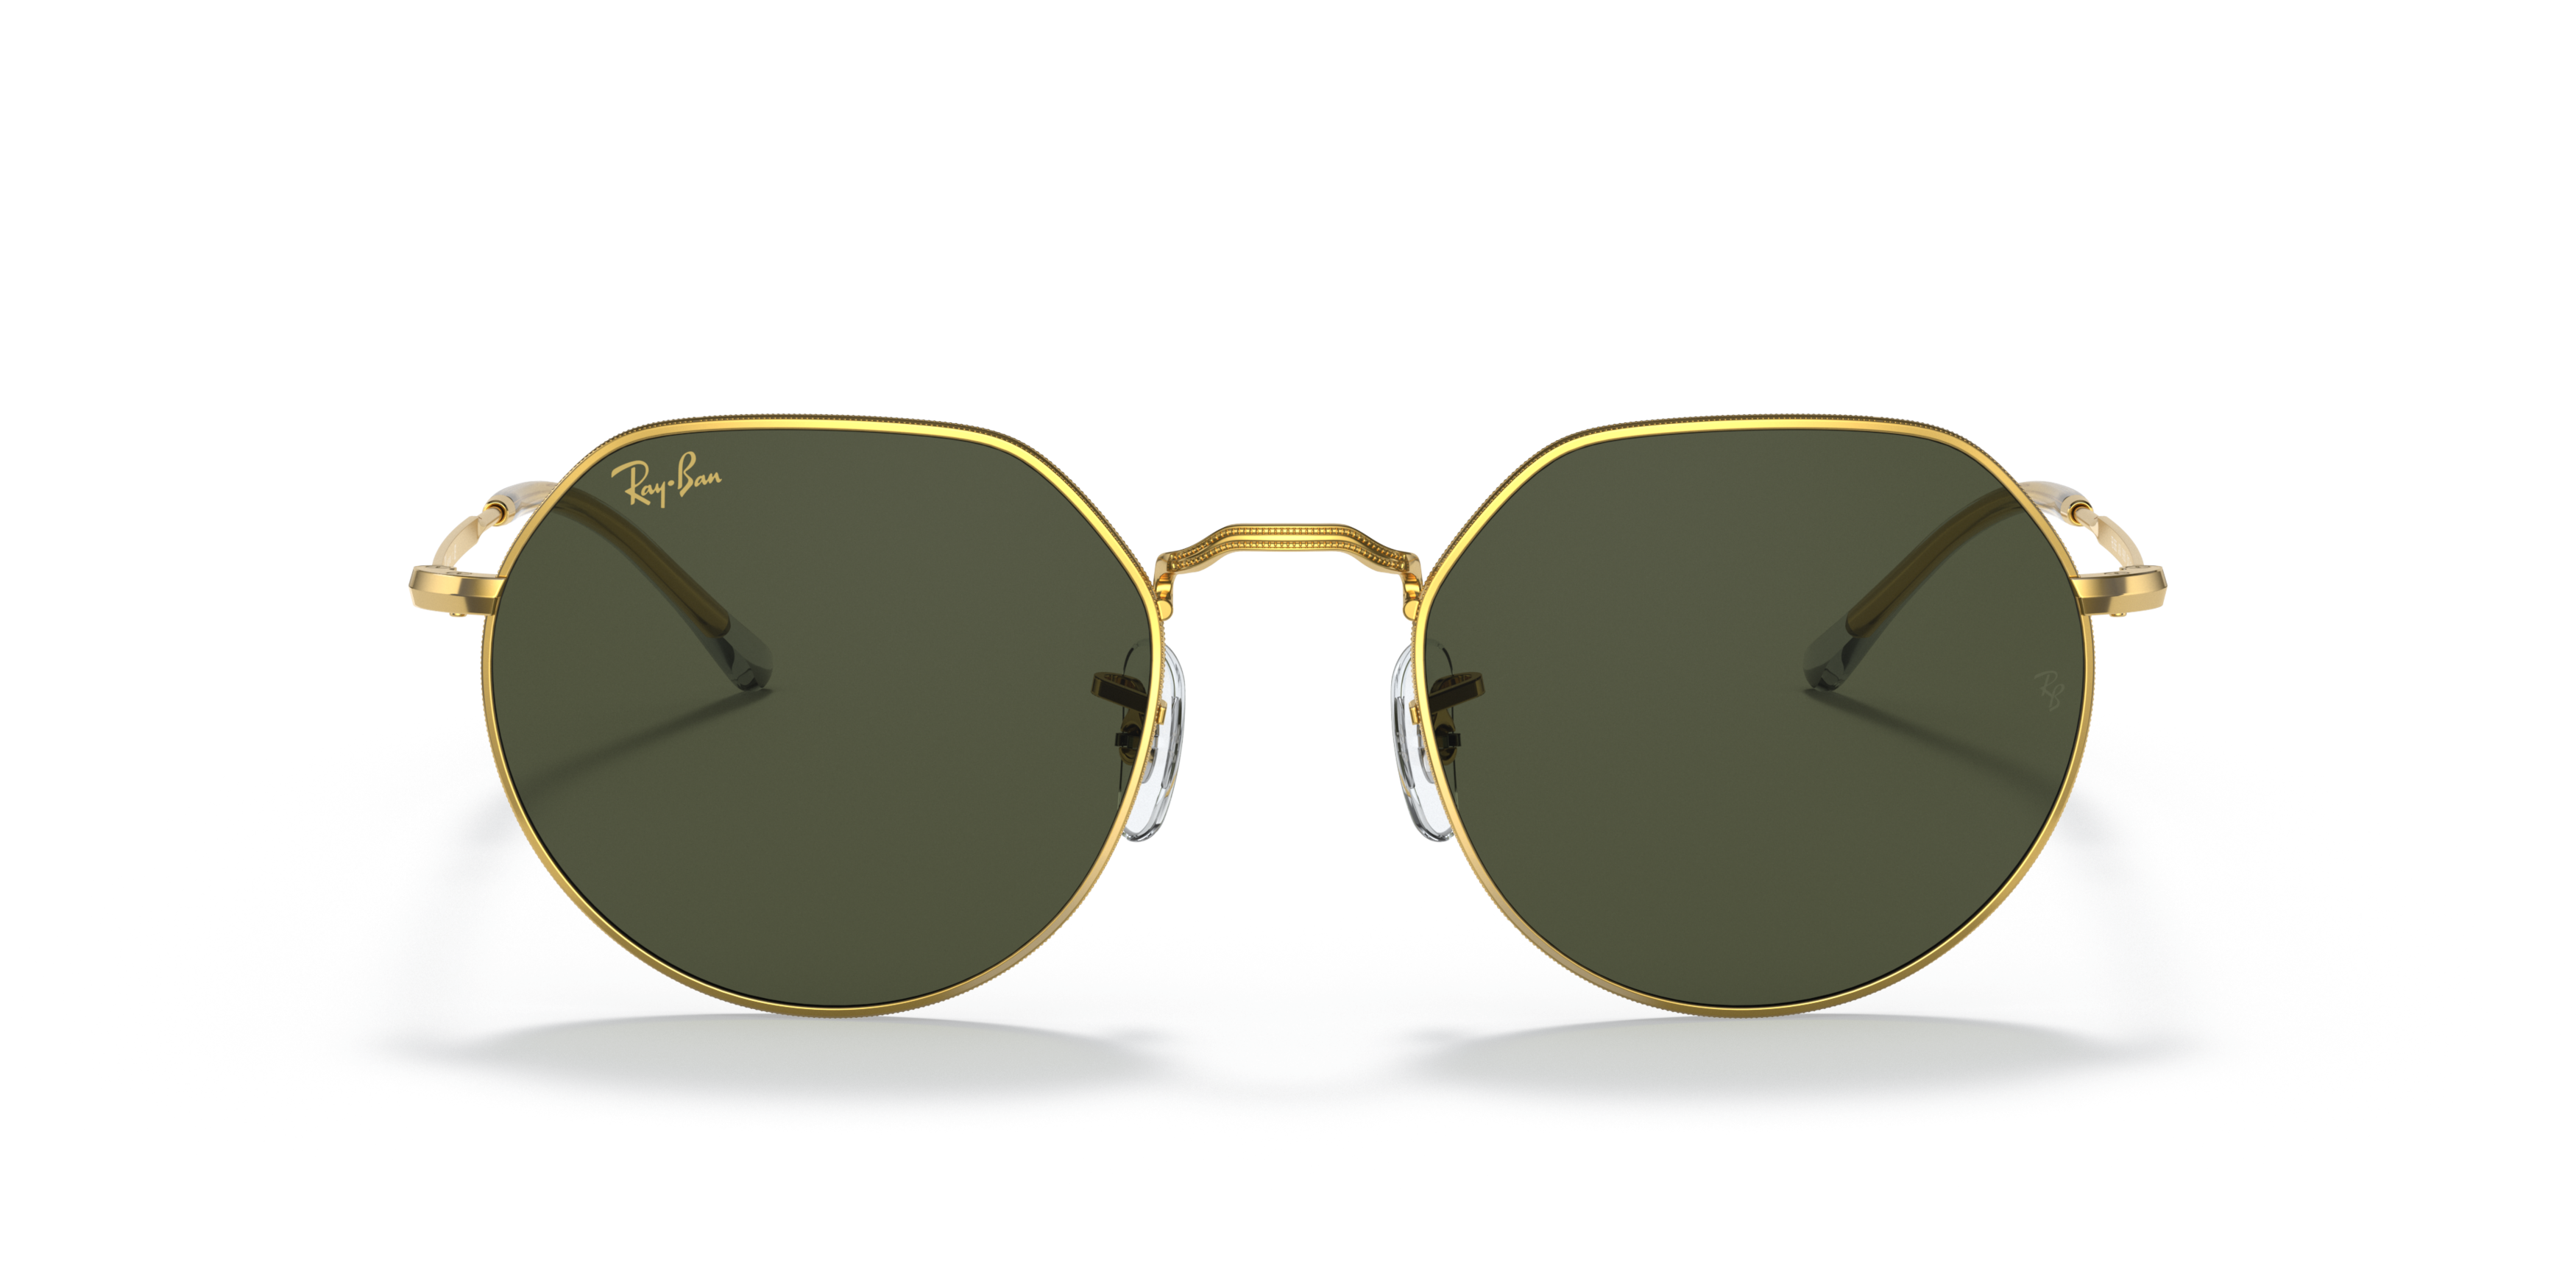 [products.image.front] RAY-BAN RB3565 919631